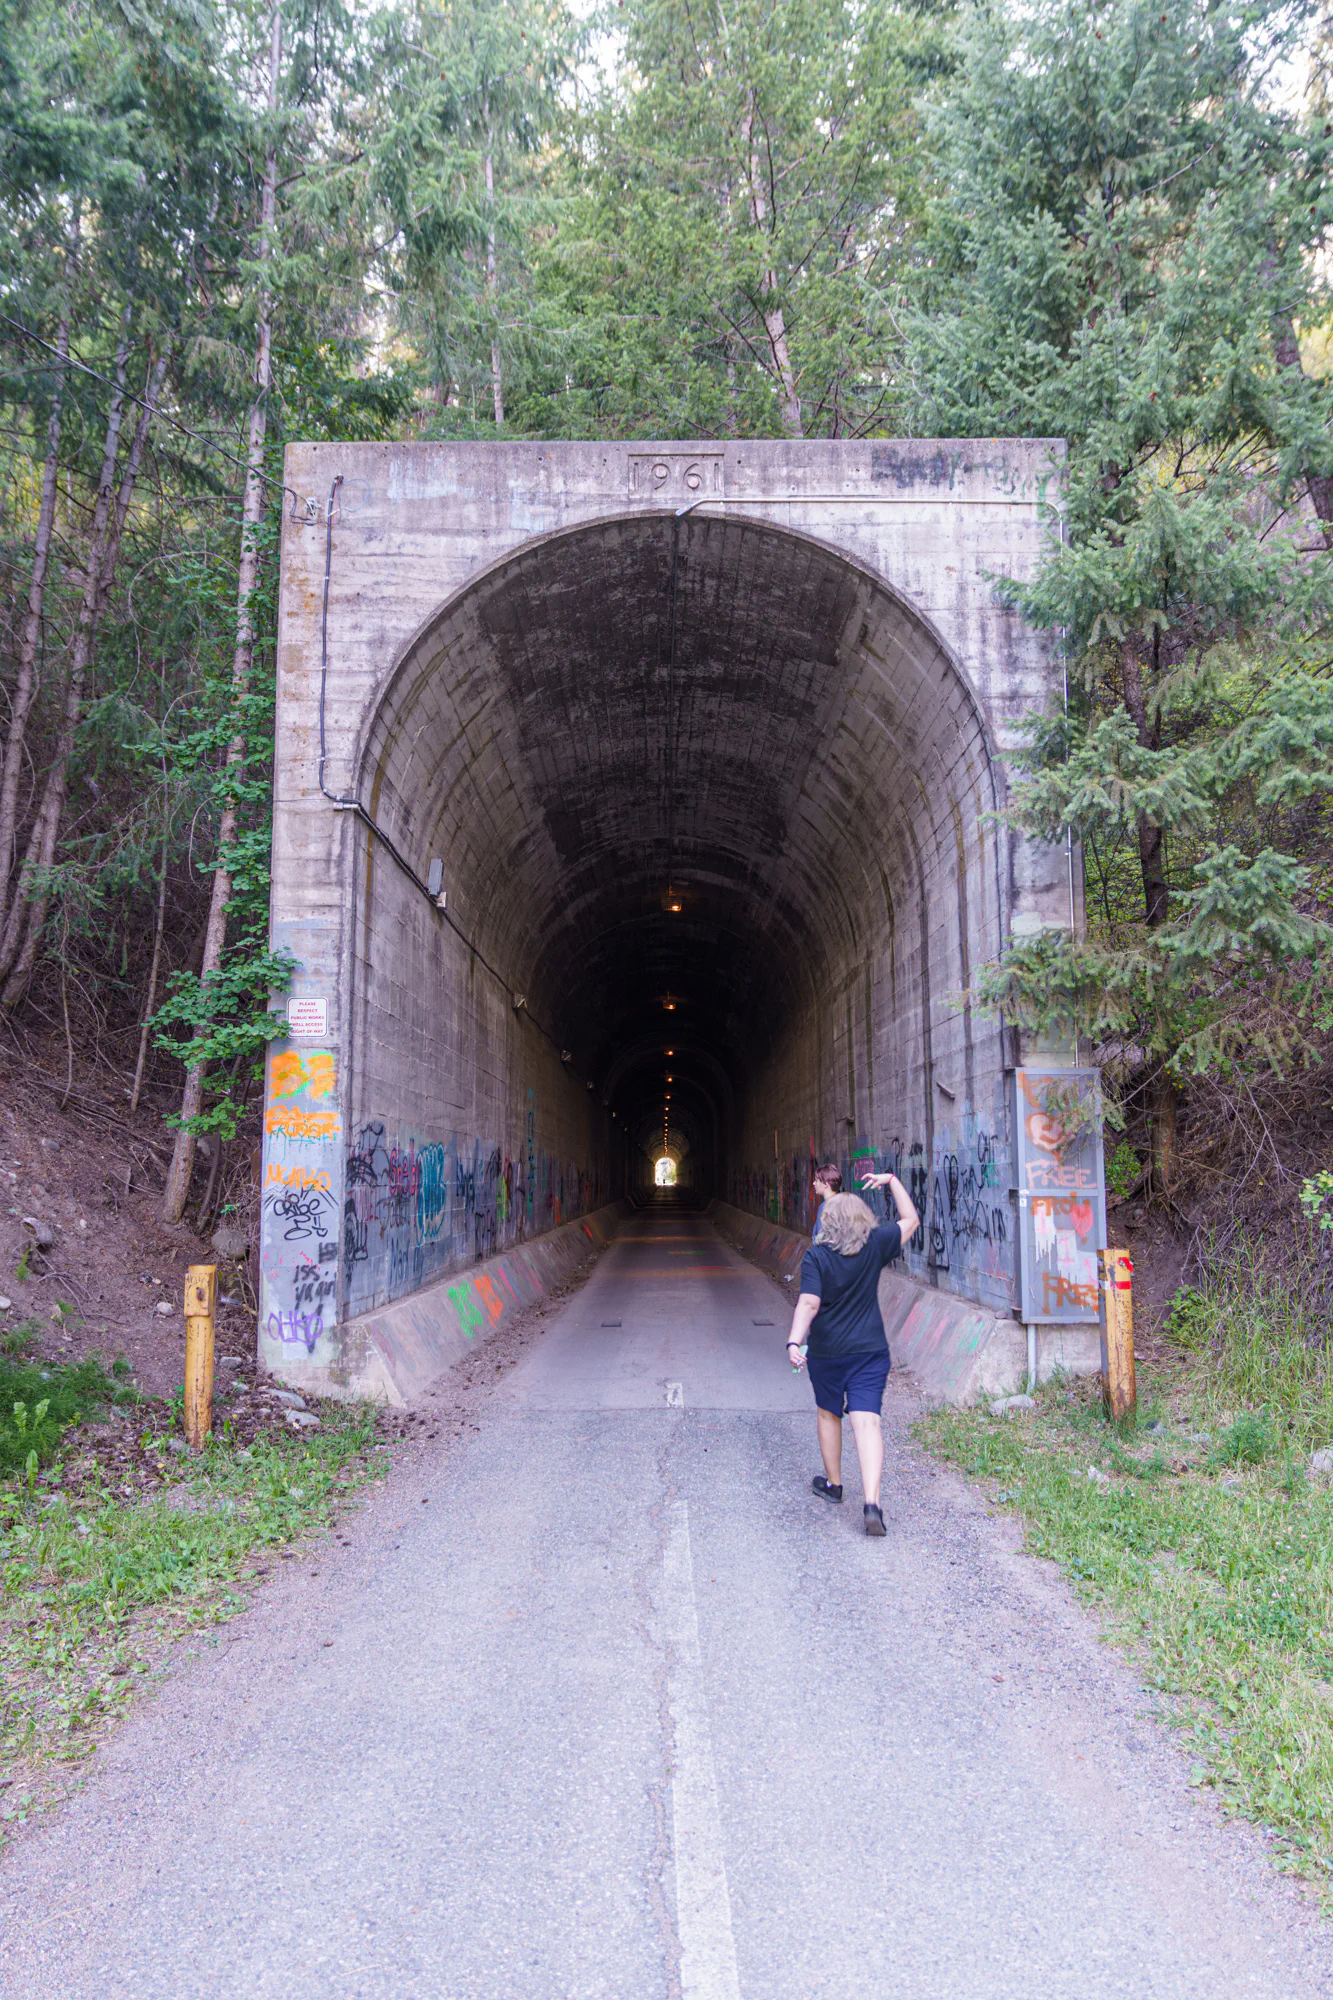 Entering the Princeton Tunnel